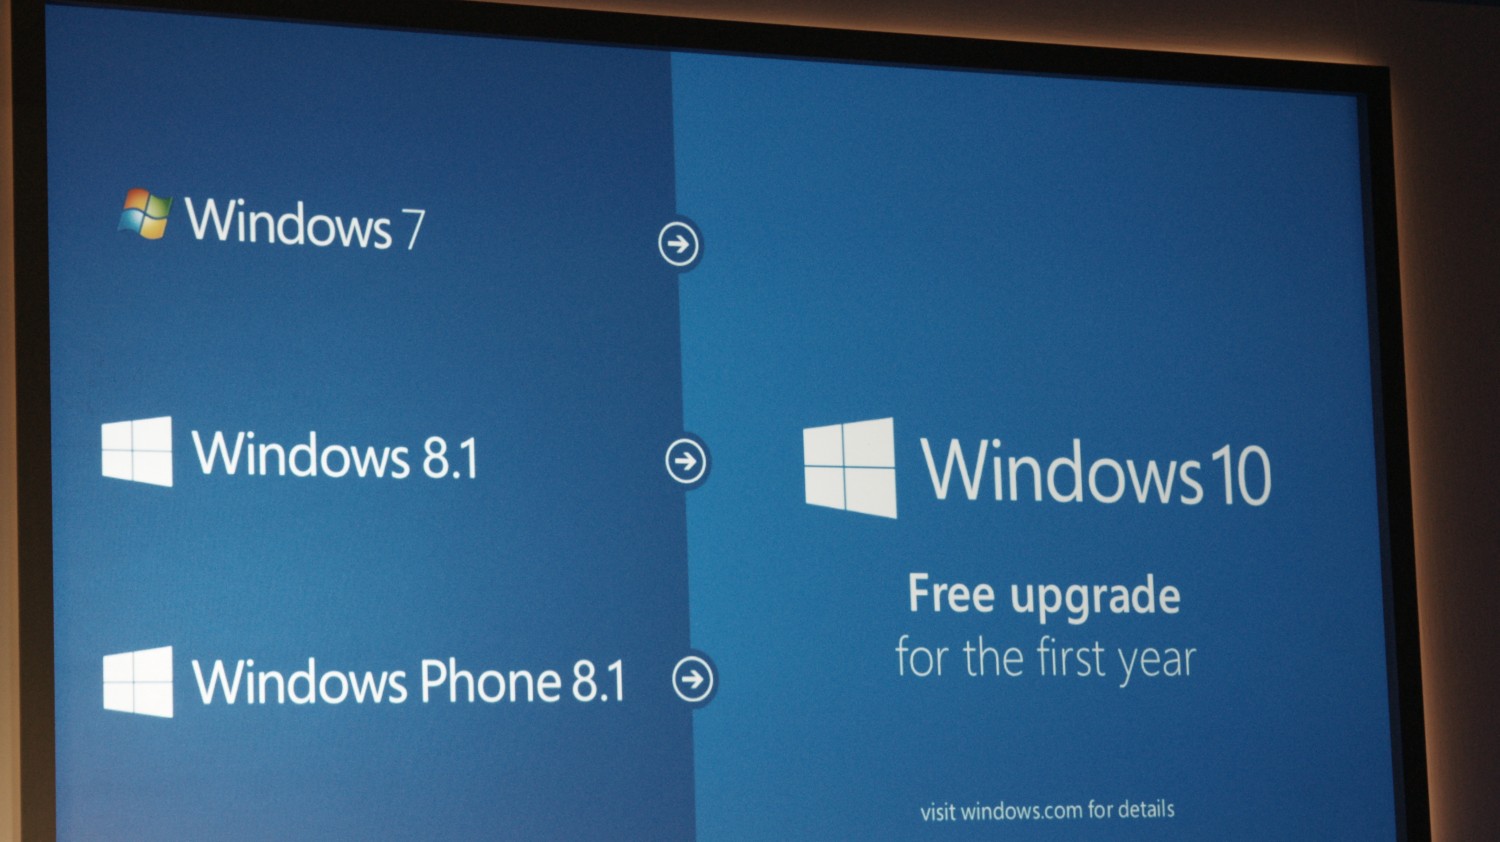 Windows 10 0121 34 Windows 10 will be a free upgrade for Windows 7, 8 and 8.1 users